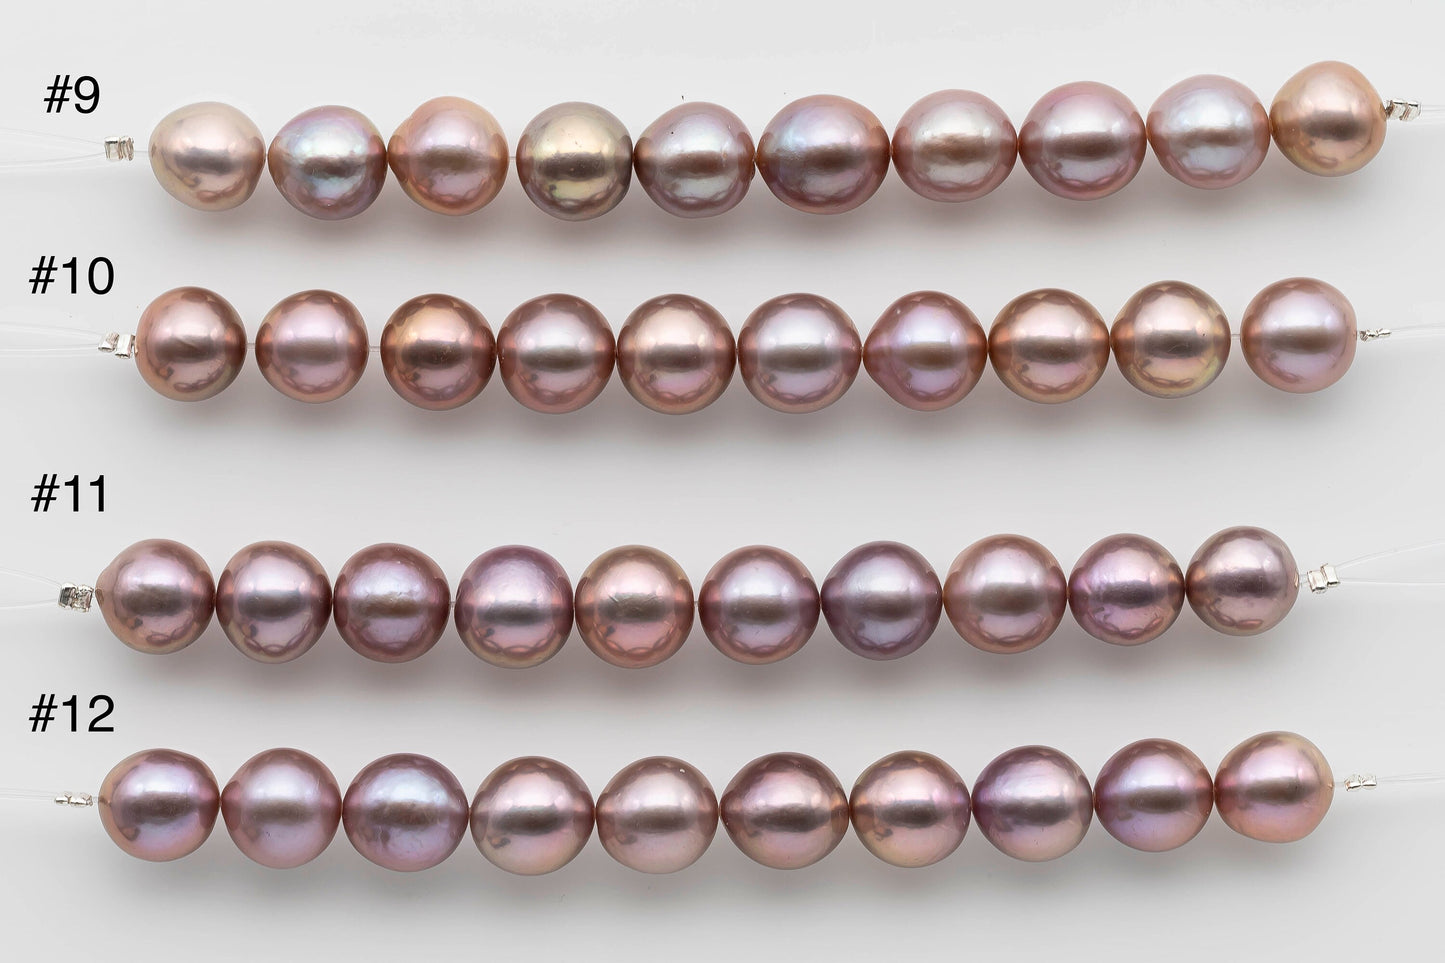 10-11mm Round Edison Pearl with Nice Luster in Natural Colors Freshwater Pearl Beads for Jewelry Making, SKU # 1237EP